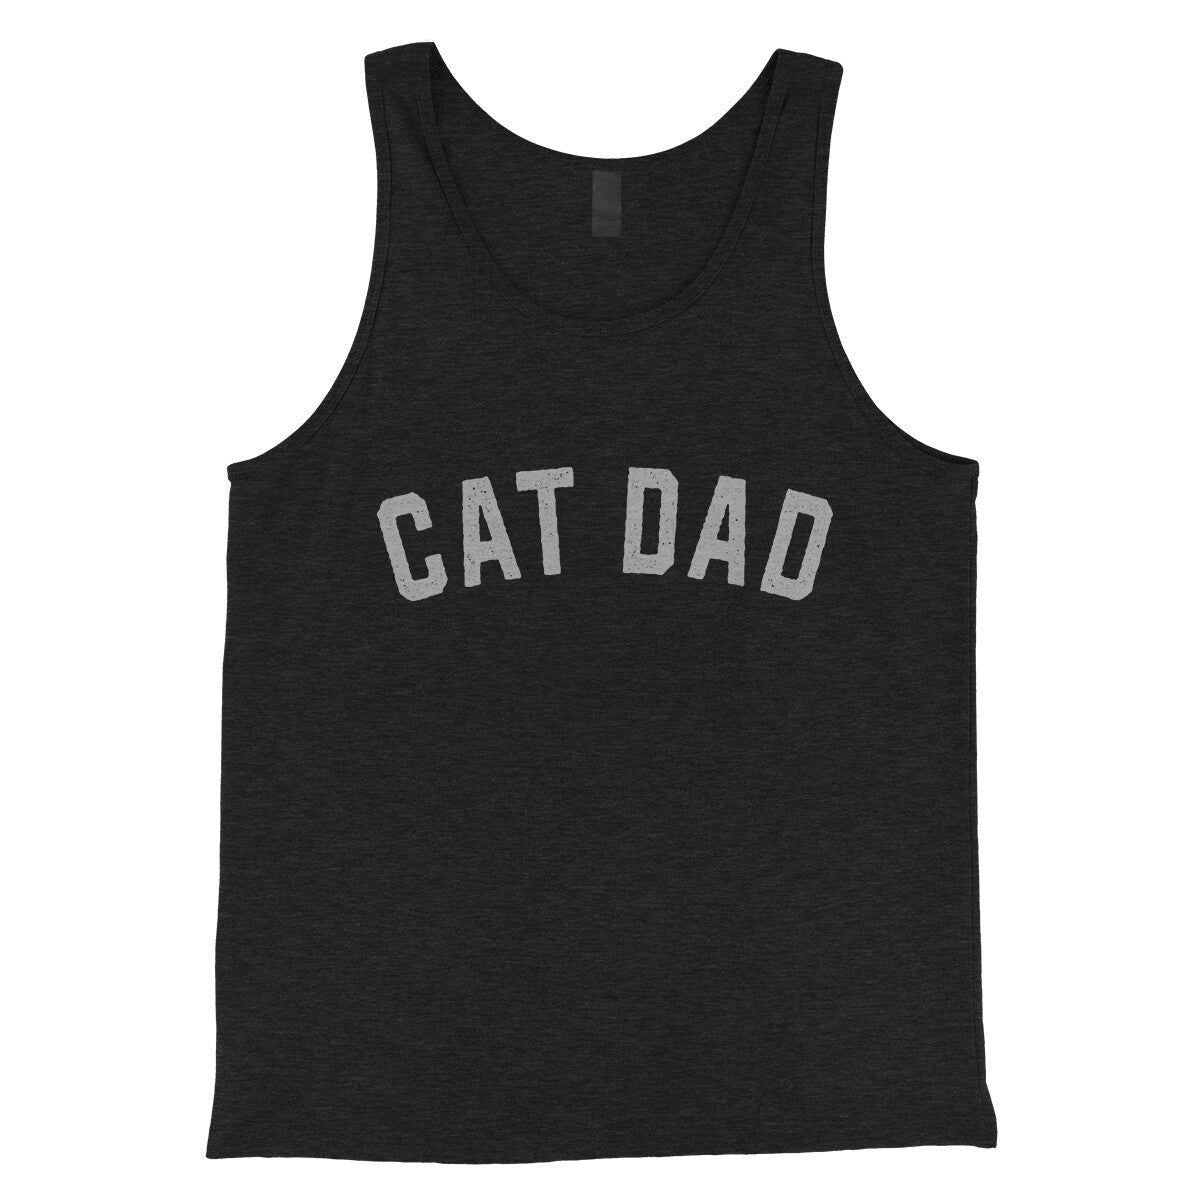 Cat Dad in Charcoal Black TriBlend Color